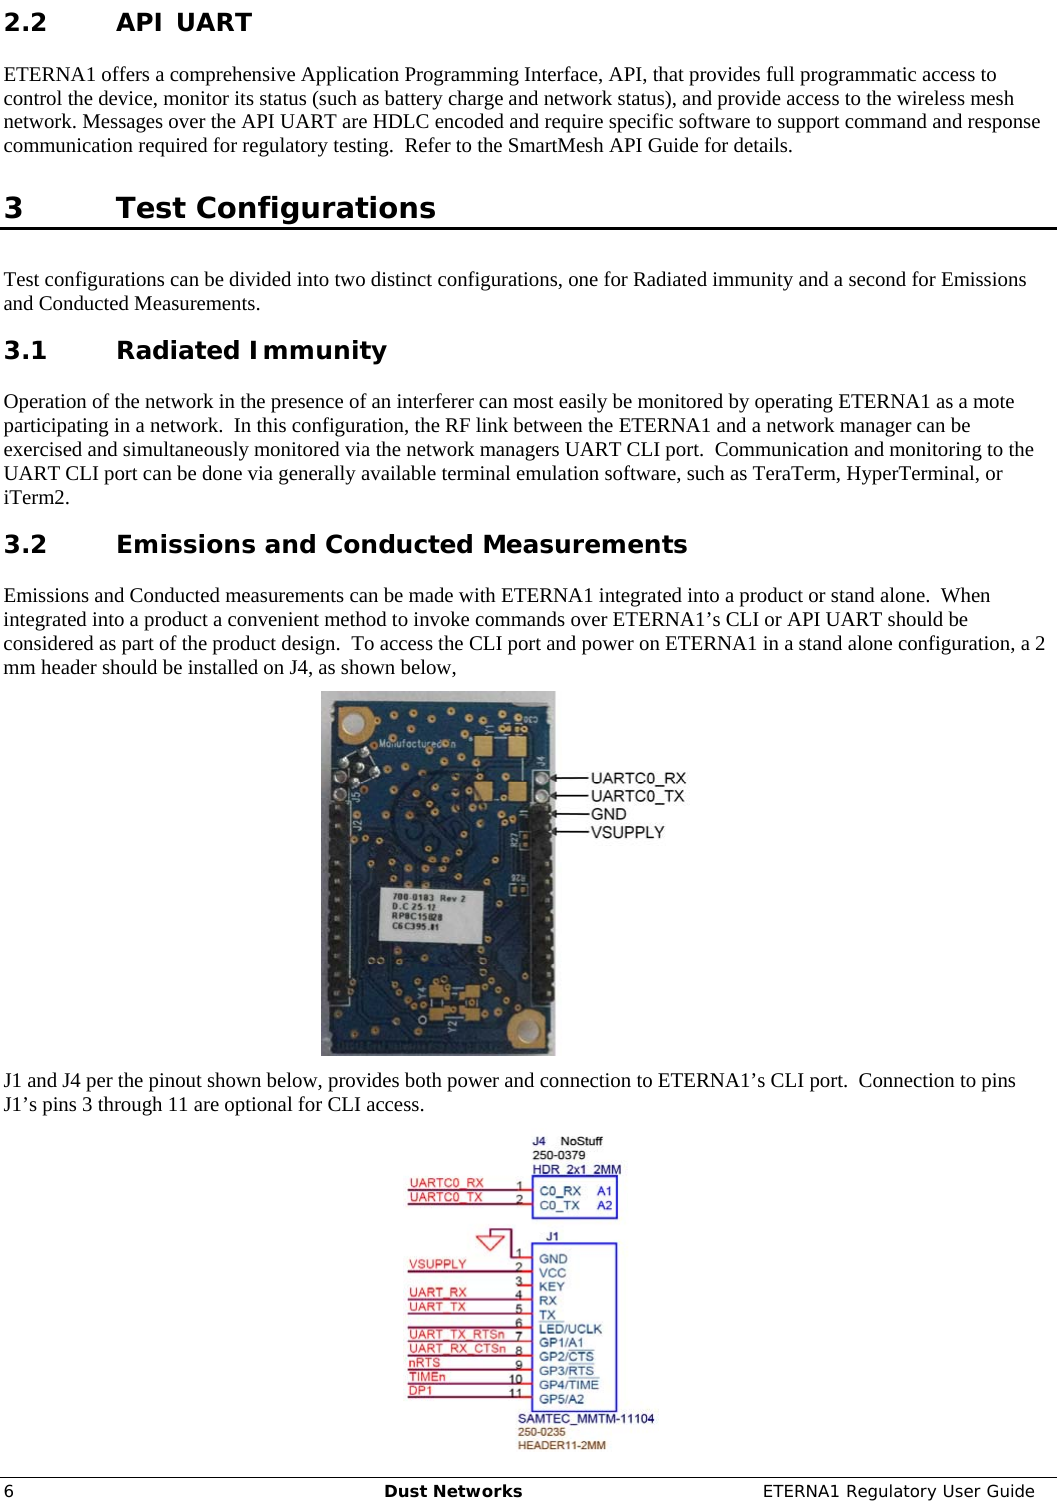     6  Dust Networks  ETERNA1 Regulatory User Guide 2.2 API UART ETERNA1 offers a comprehensive Application Programming Interface, API, that provides full programmatic access to control the device, monitor its status (such as battery charge and network status), and provide access to the wireless mesh network. Messages over the API UART are HDLC encoded and require specific software to support command and response communication required for regulatory testing.  Refer to the SmartMesh API Guide for details.  3 Test Configurations Test configurations can be divided into two distinct configurations, one for Radiated immunity and a second for Emissions and Conducted Measurements. 3.1 Radiated Immunity Operation of the network in the presence of an interferer can most easily be monitored by operating ETERNA1 as a mote participating in a network.  In this configuration, the RF link between the ETERNA1 and a network manager can be exercised and simultaneously monitored via the network managers UART CLI port.  Communication and monitoring to the UART CLI port can be done via generally available terminal emulation software, such as TeraTerm, HyperTerminal, or iTerm2. 3.2 Emissions and Conducted Measurements Emissions and Conducted measurements can be made with ETERNA1 integrated into a product or stand alone.  When integrated into a product a convenient method to invoke commands over ETERNA1’s CLI or API UART should be considered as part of the product design.  To access the CLI port and power on ETERNA1 in a stand alone configuration, a 2 mm header should be installed on J4, as shown below,   J1 and J4 per the pinout shown below, provides both power and connection to ETERNA1’s CLI port.  Connection to pins J1’s pins 3 through 11 are optional for CLI access.   